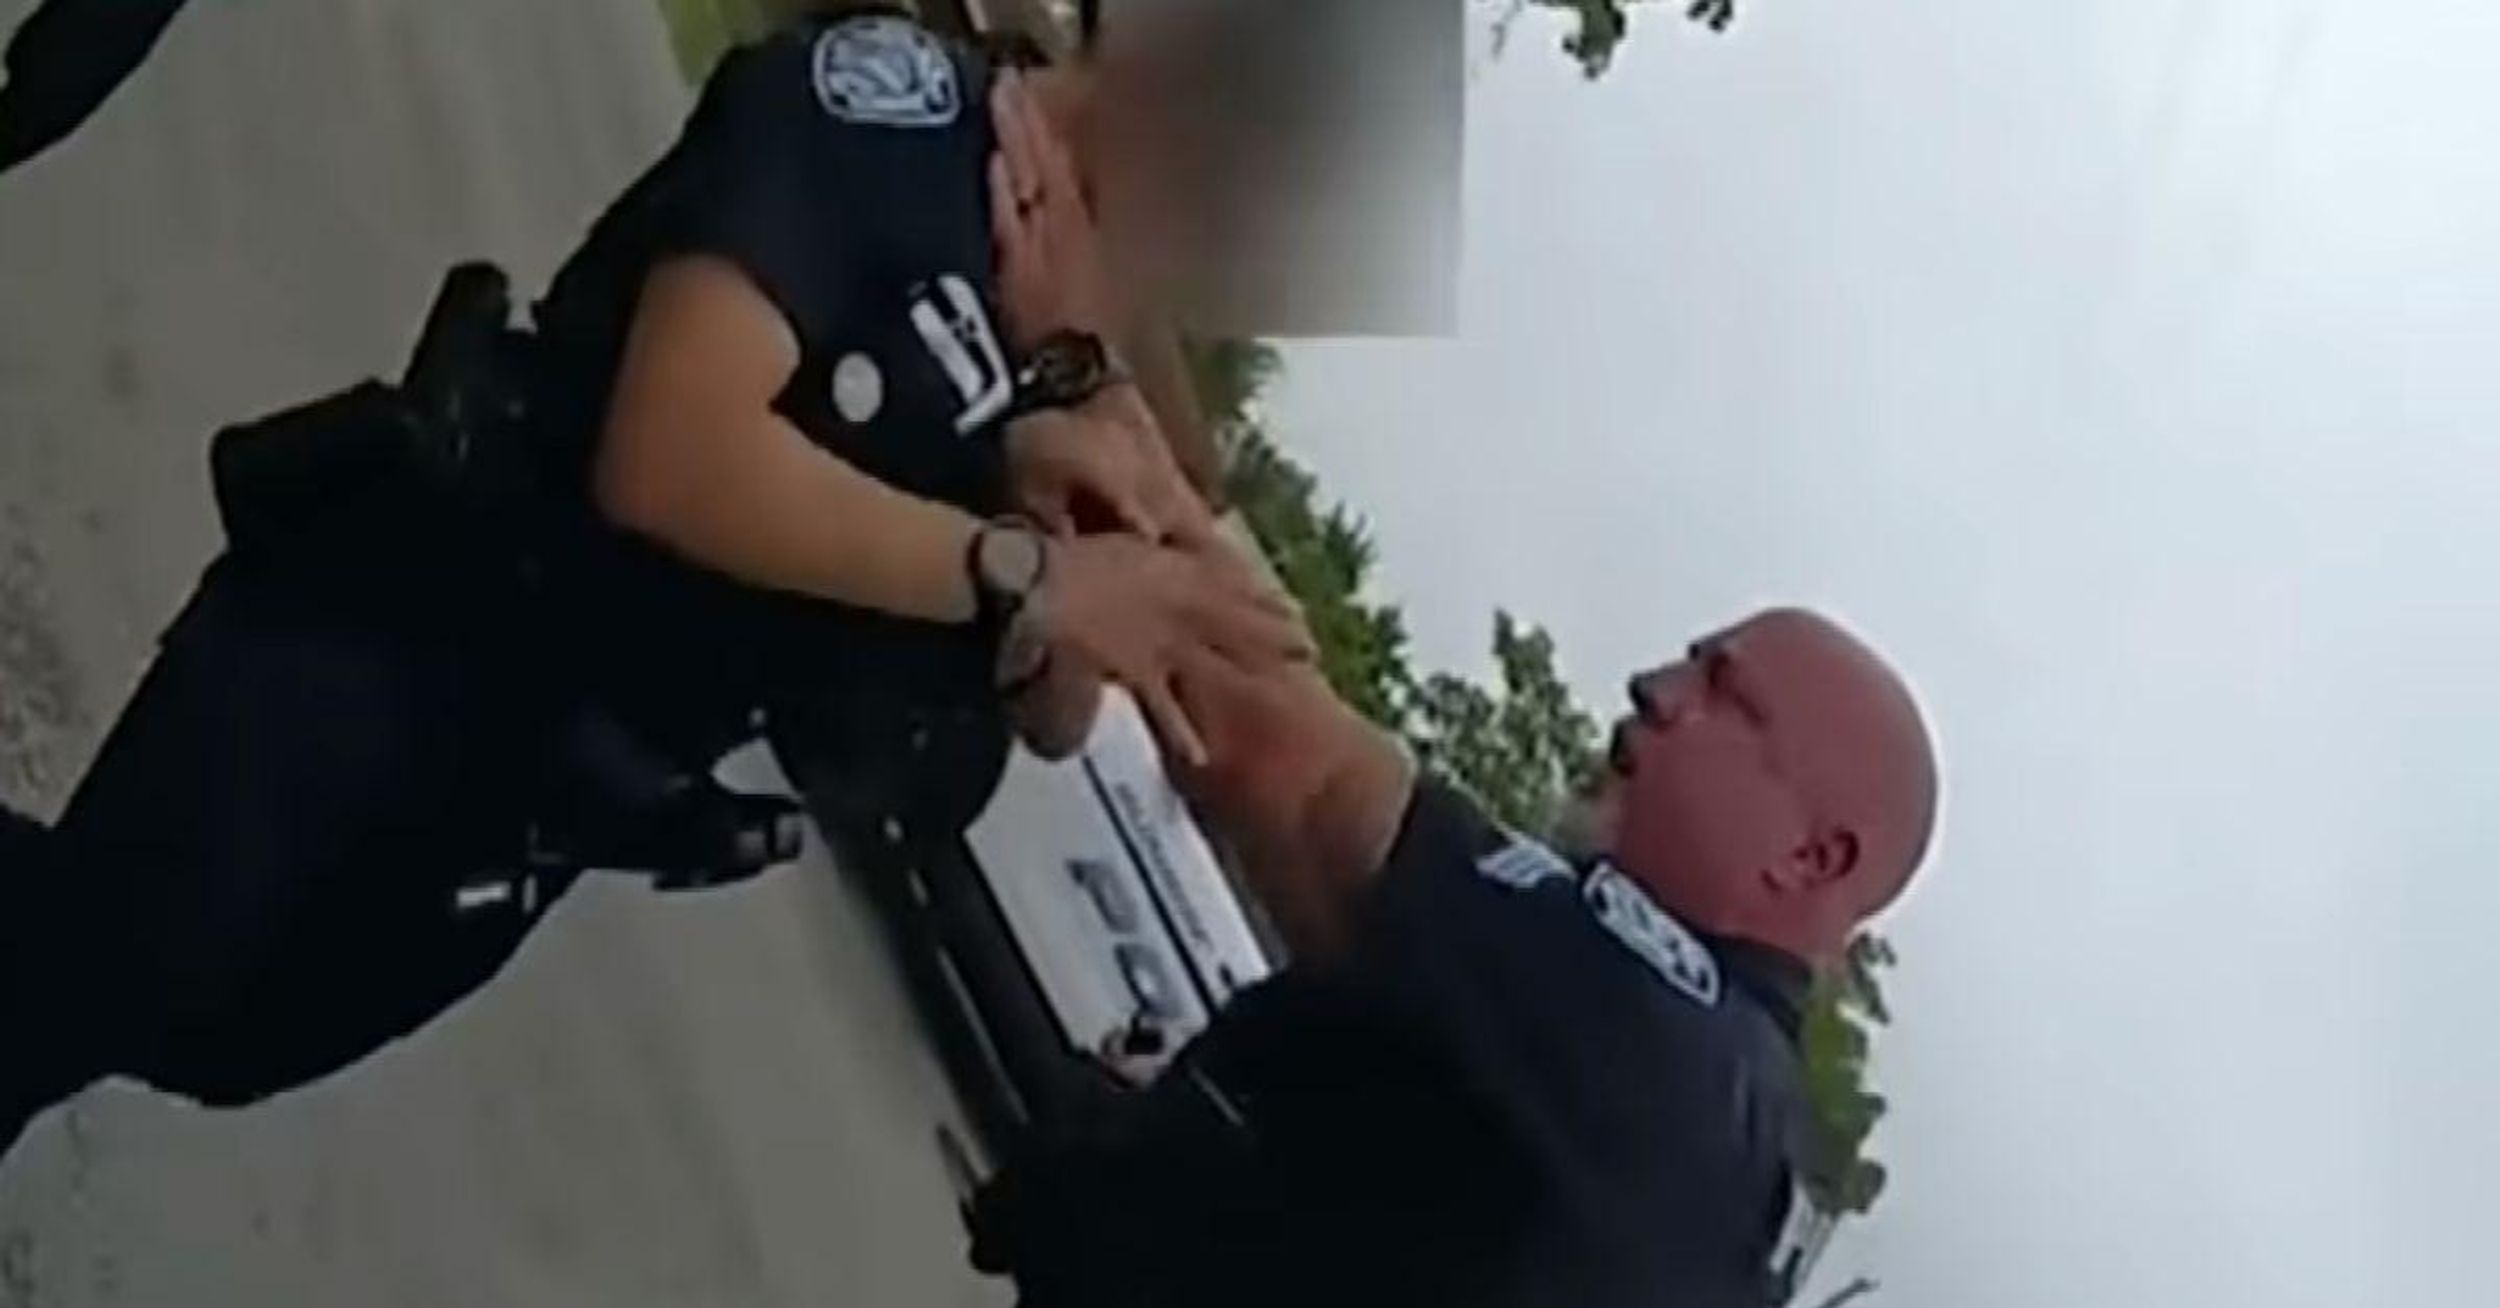 Florida Sergeant Suspended After Choking Female Officer For Trying To De-Escalate Black Man's Arrest